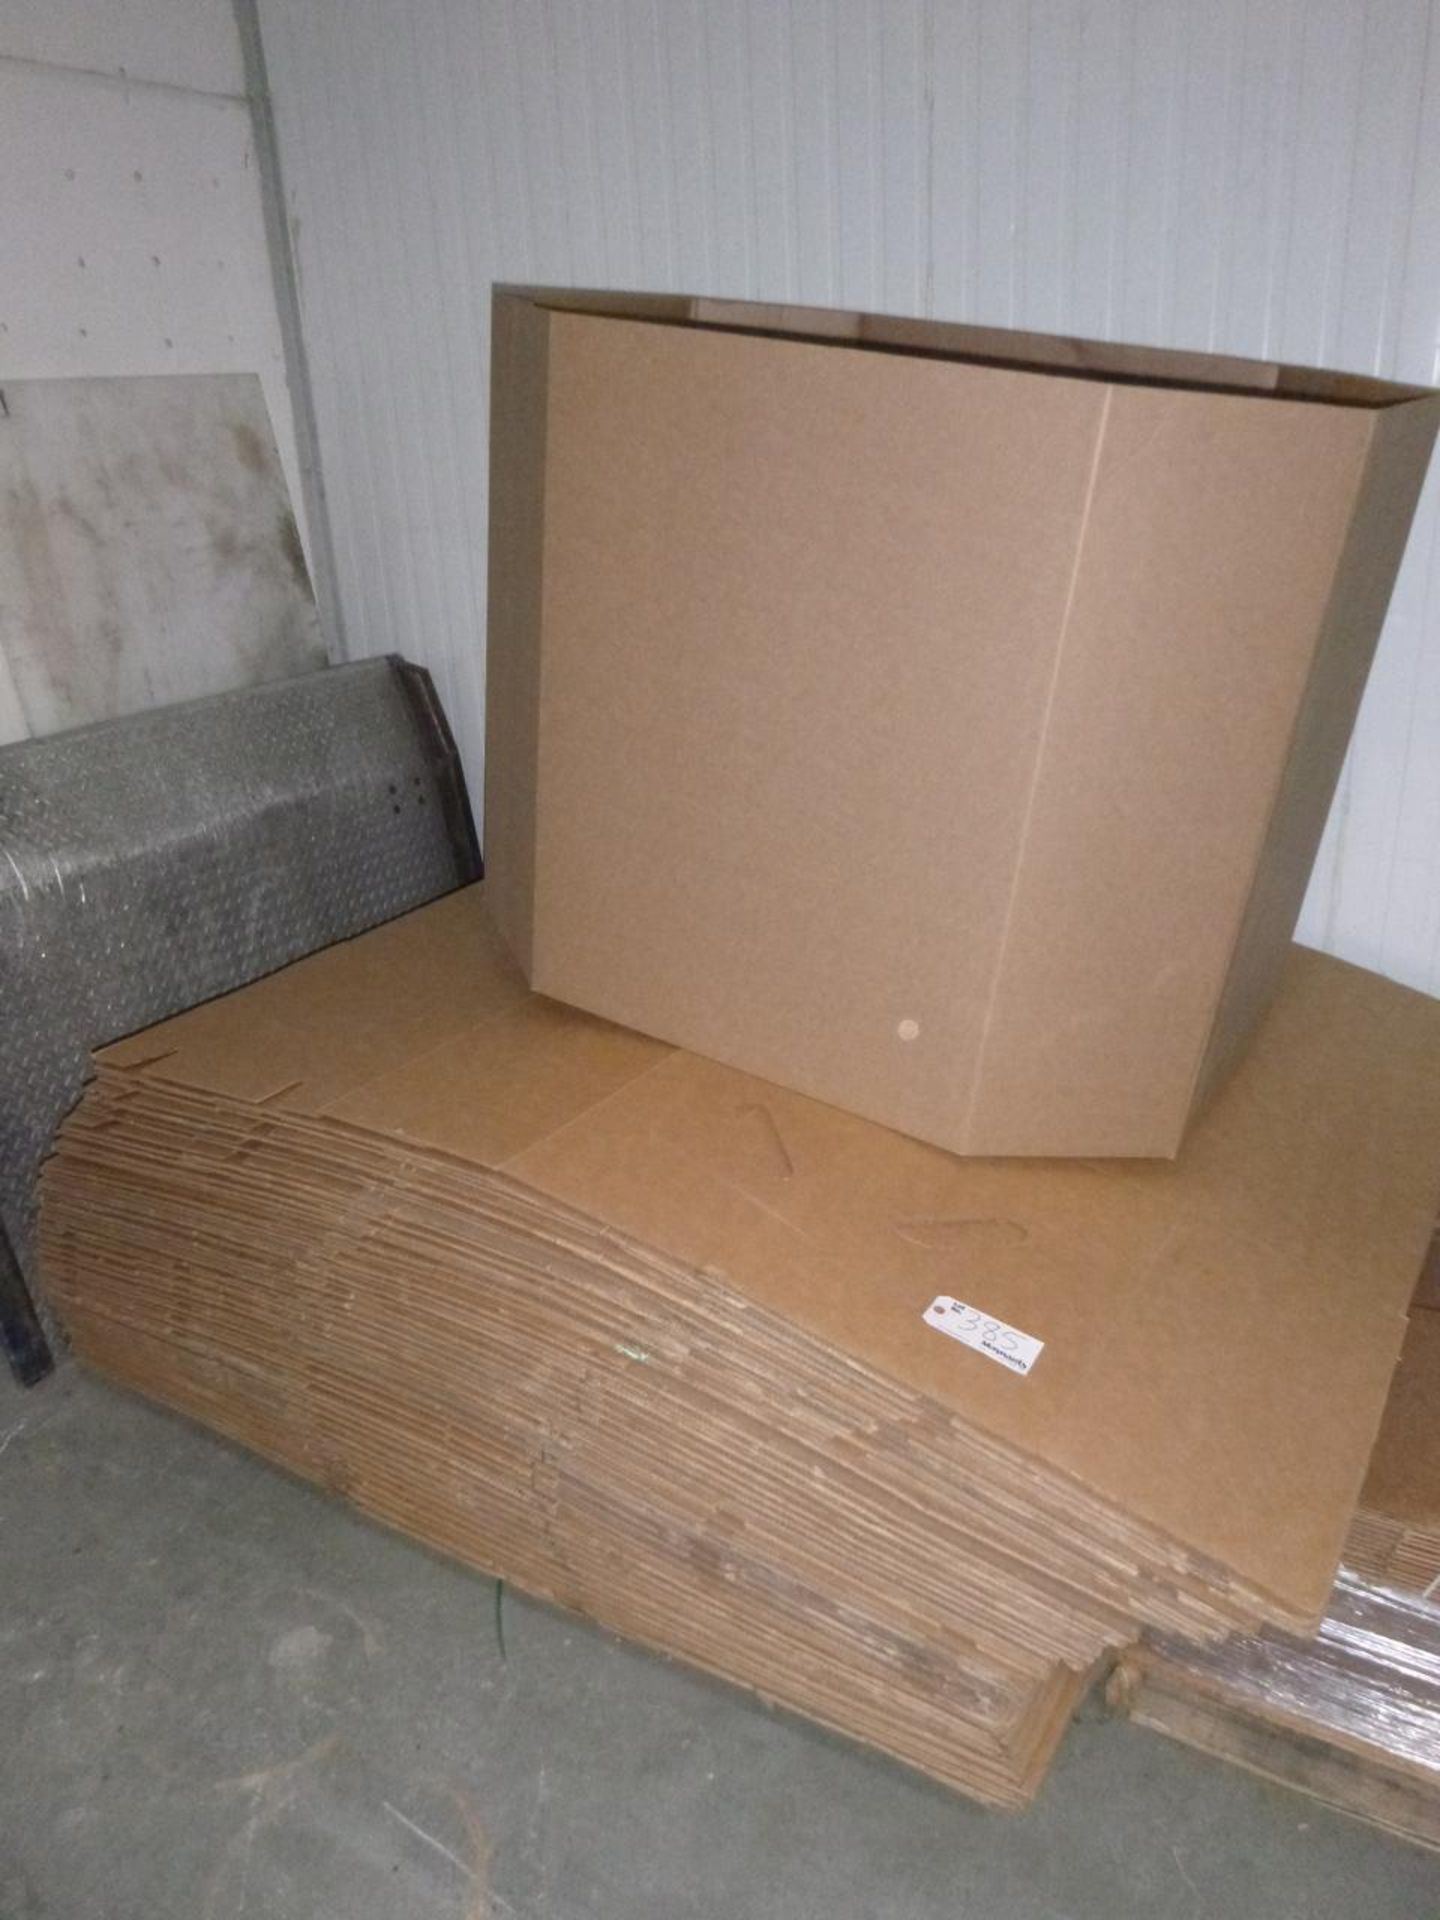 Pallet of Gaylord boxes